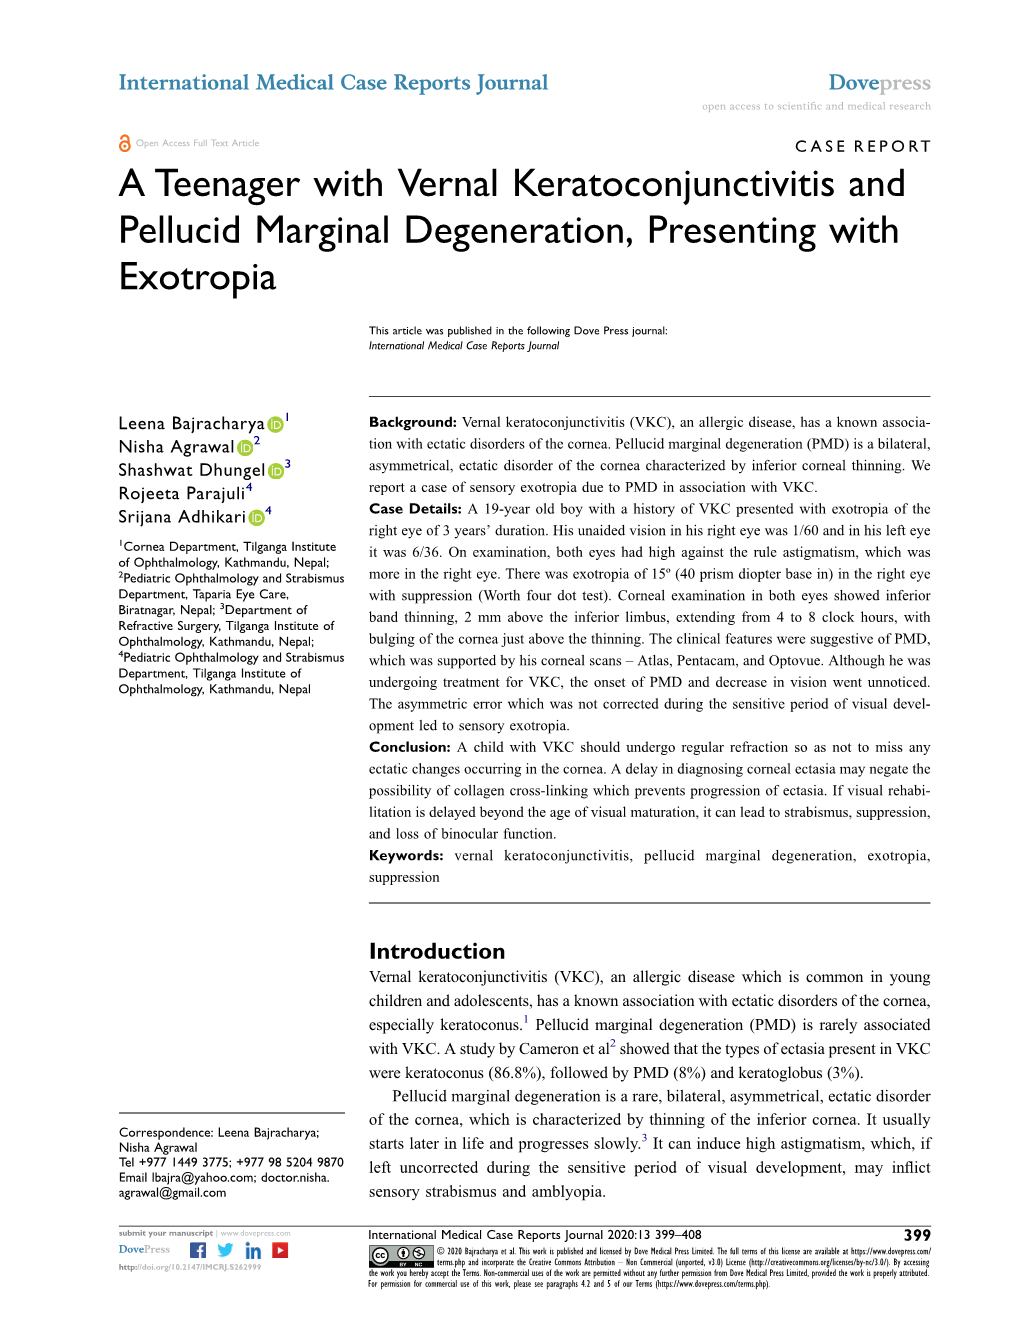 A Teenager with Vernal Keratoconjunctivitis and Pellucid Marginal Degeneration, Presenting with Exotropia